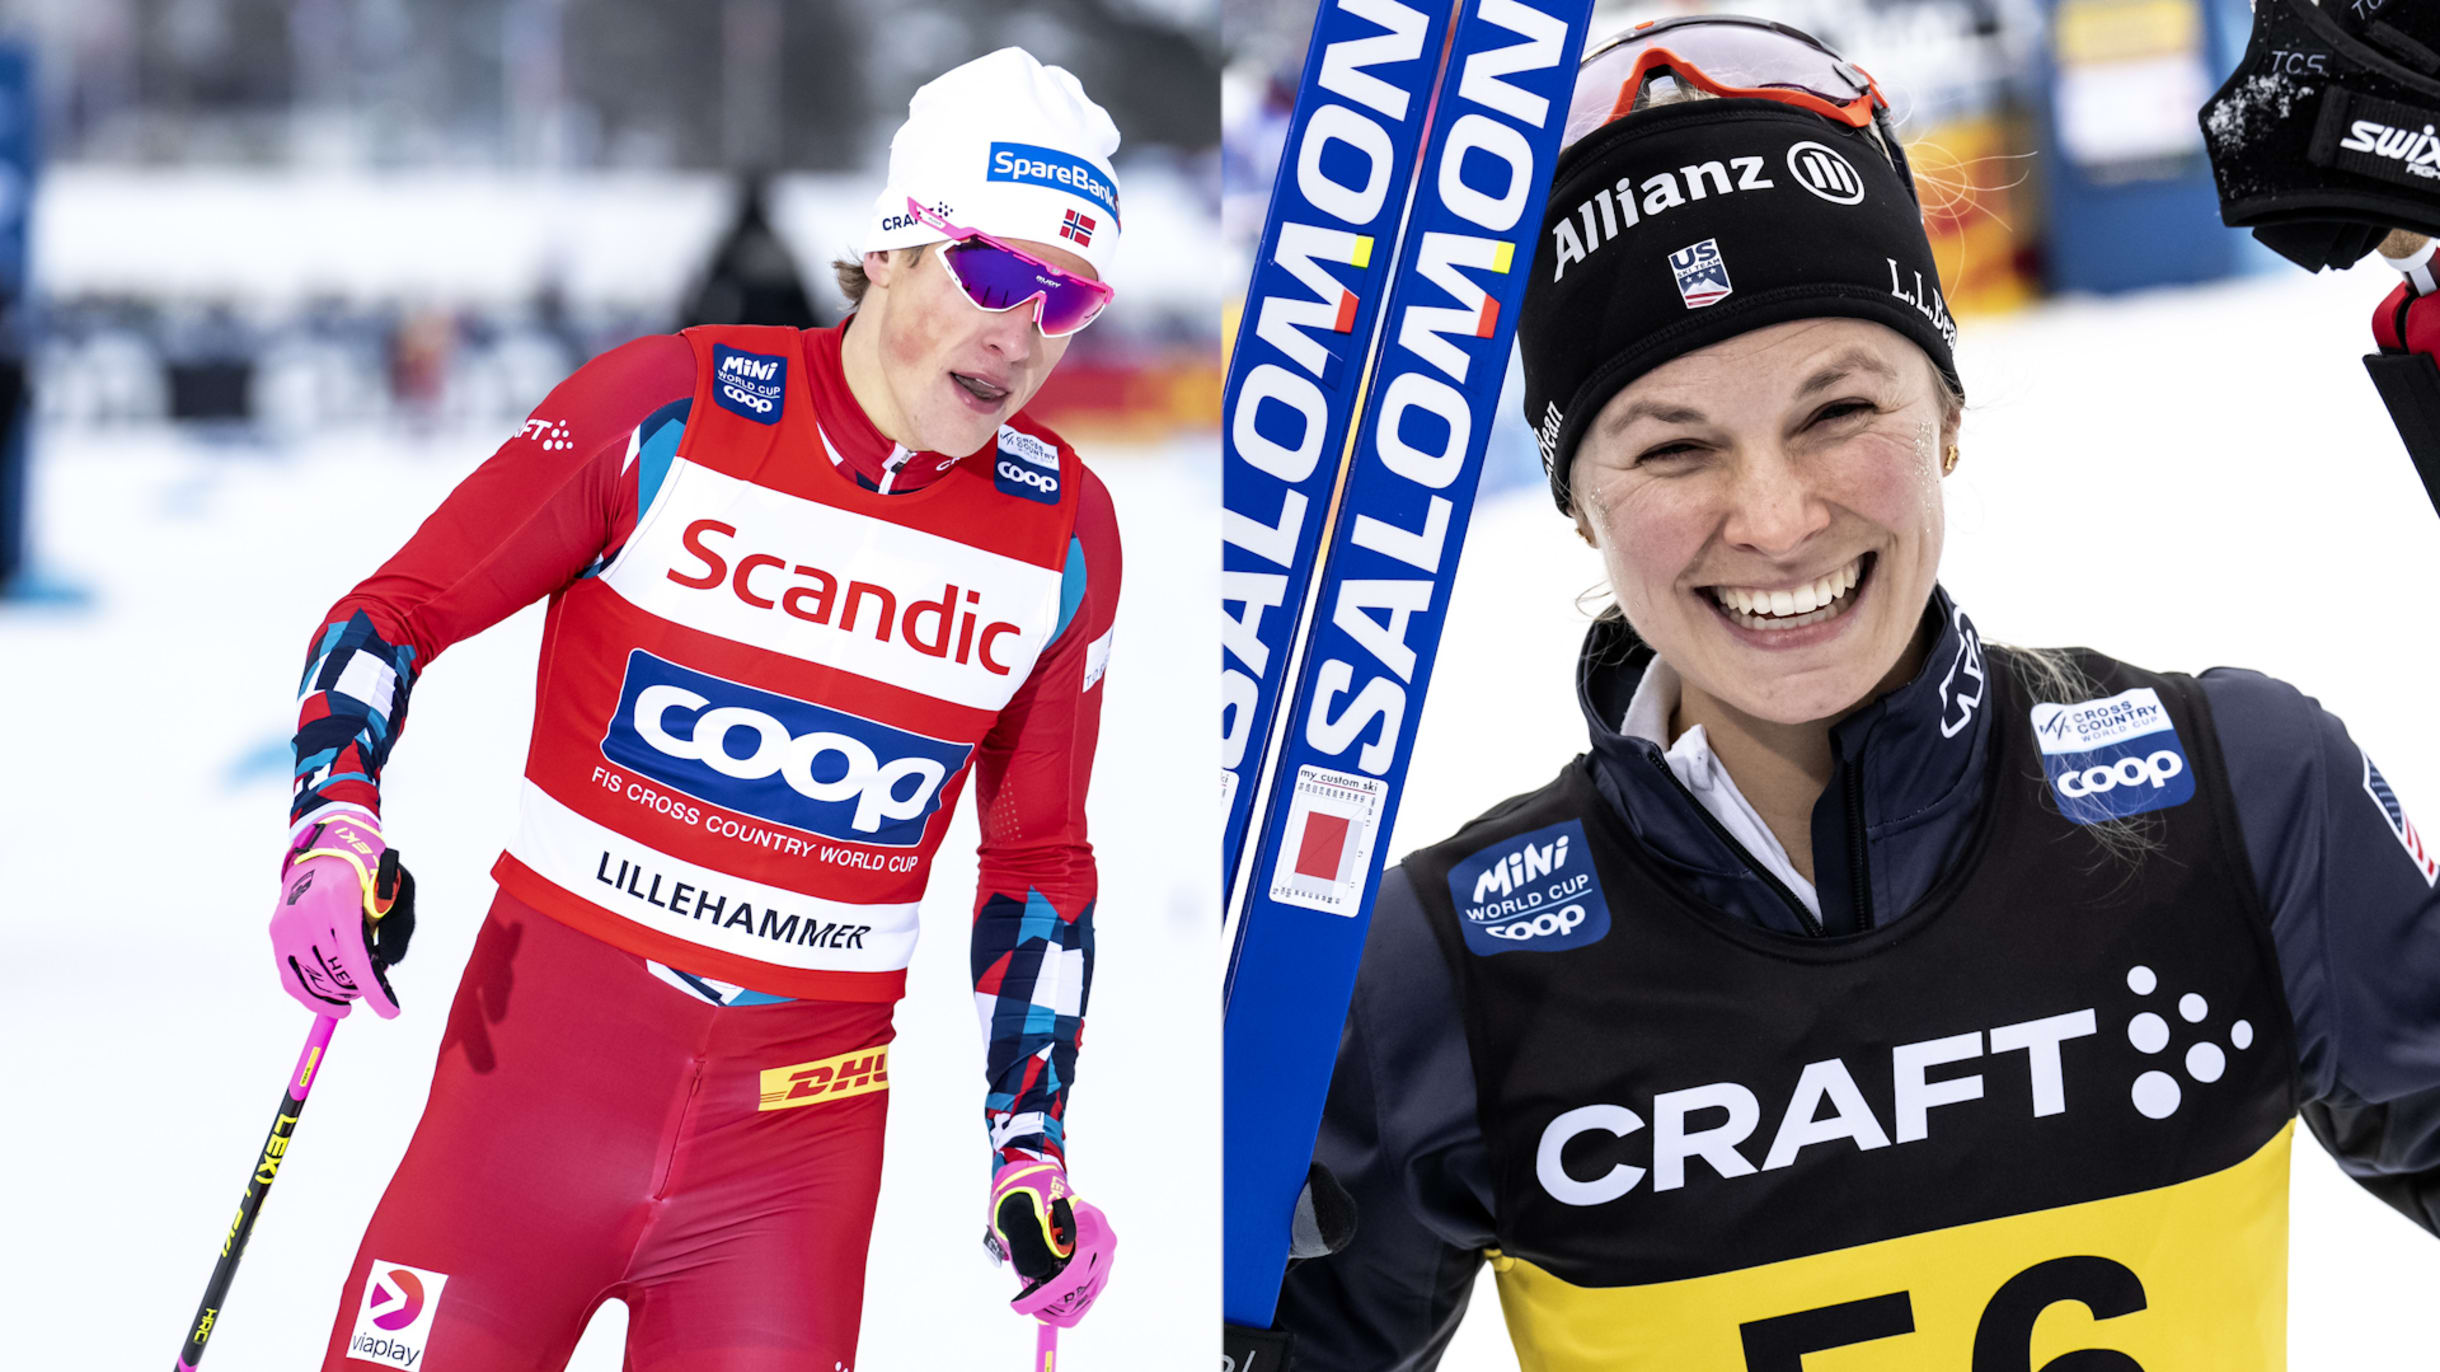 Tour de Ski 2022-23 Preview, schedule and stars to watch